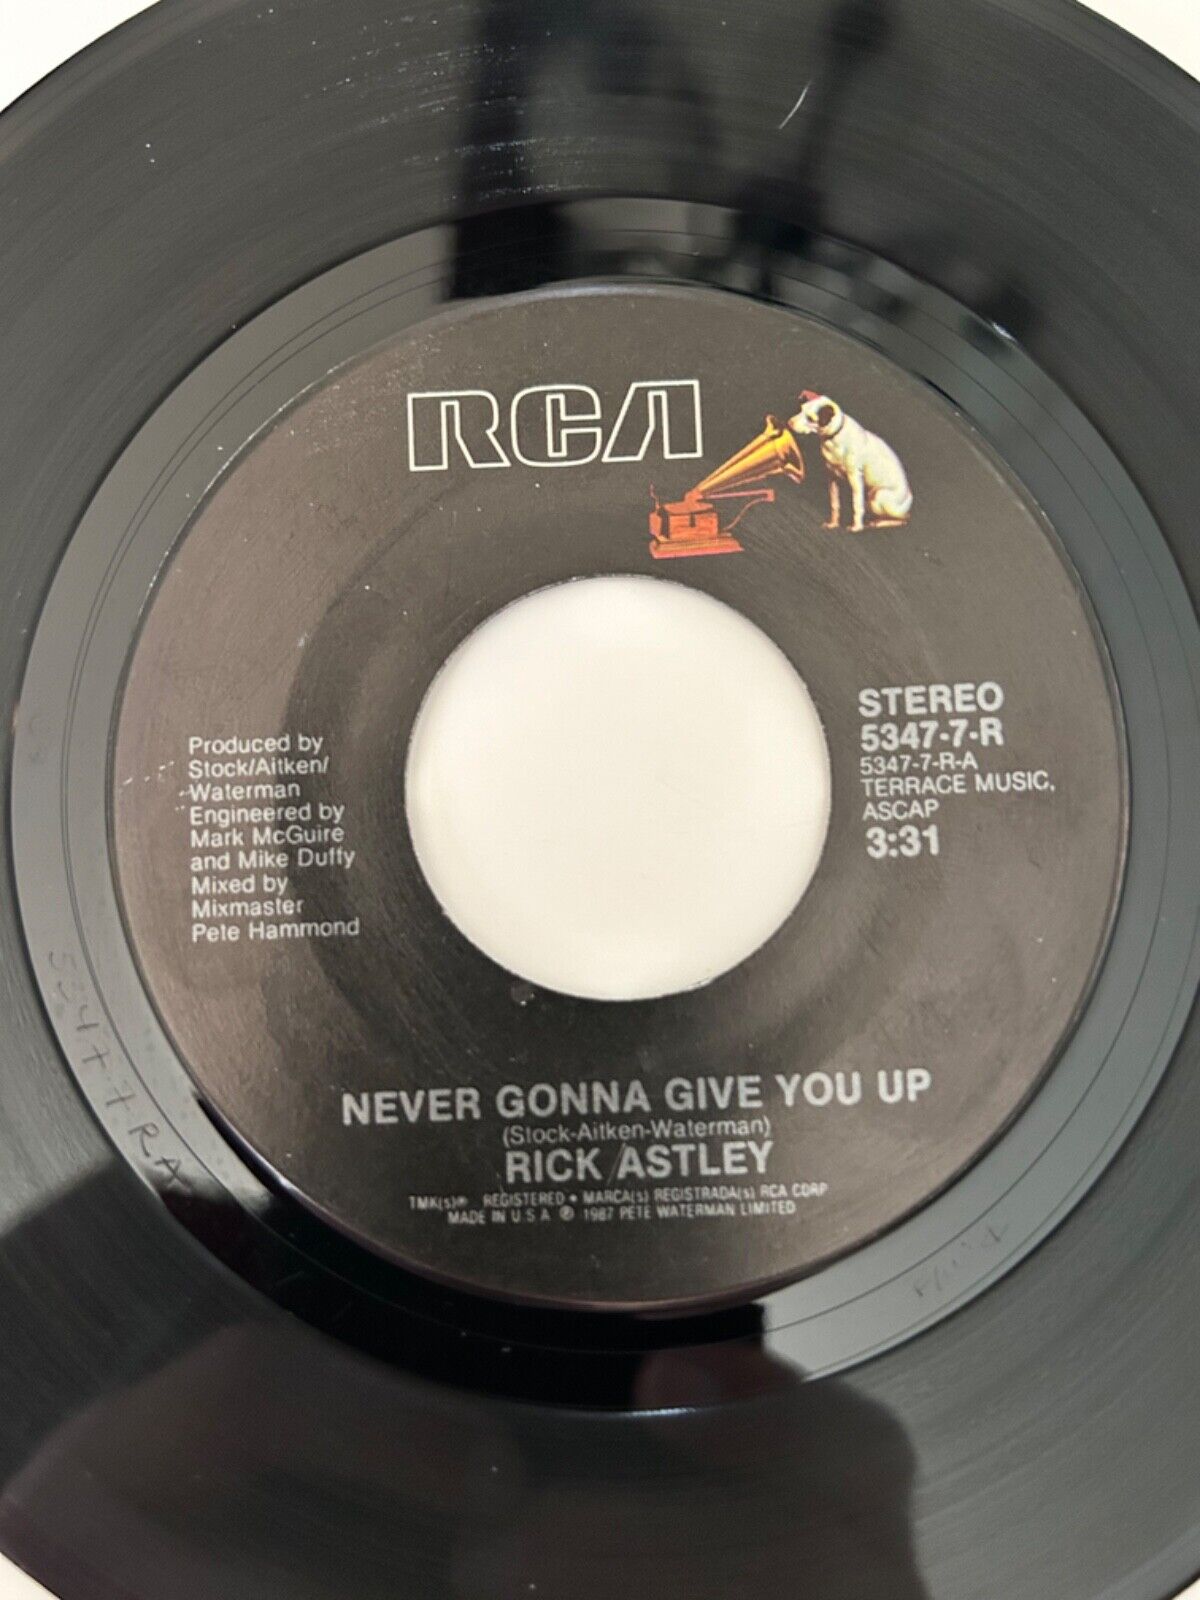 1987 Rick Astley "Never Gonna Give You Up" and "Instrumental" 45 RPM  Record EX